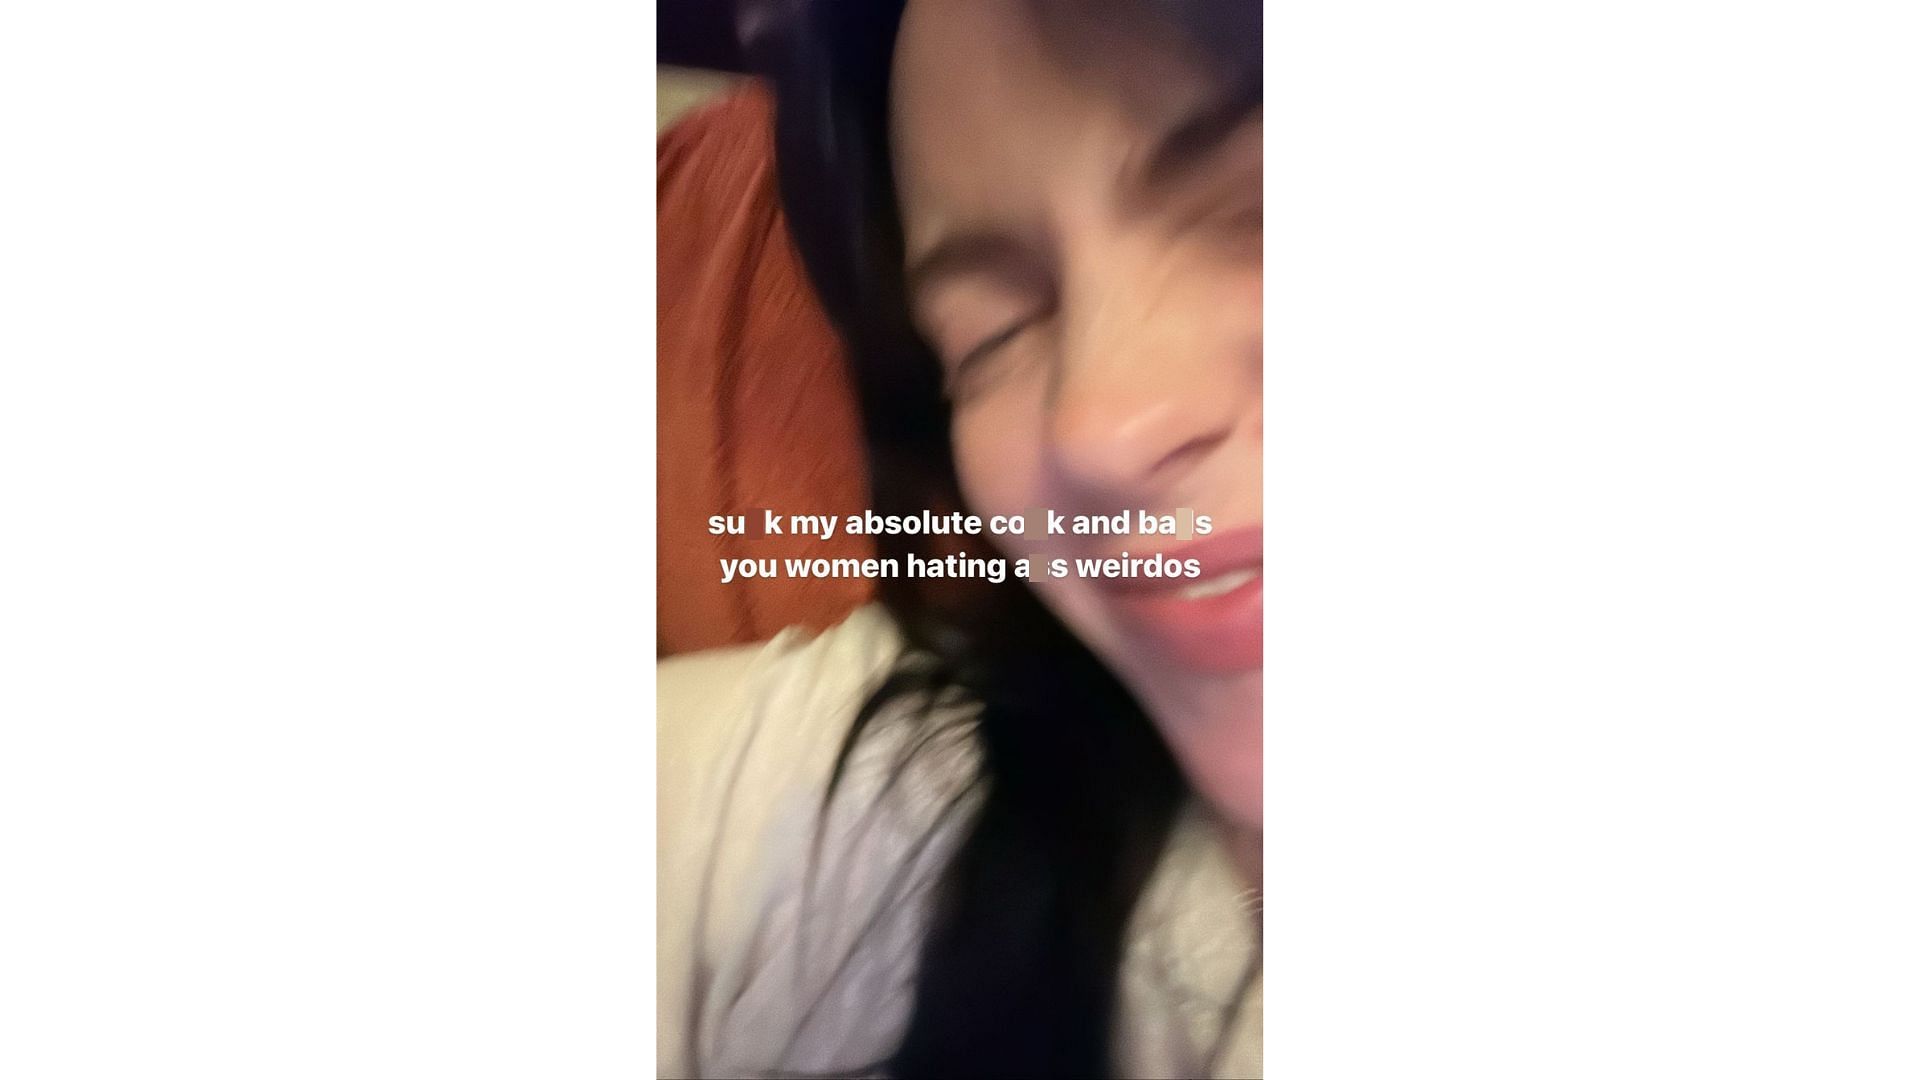 Billie Eilish&#039;s message to haters on her Instagram (Image via Instagram/ Billie Eilish)